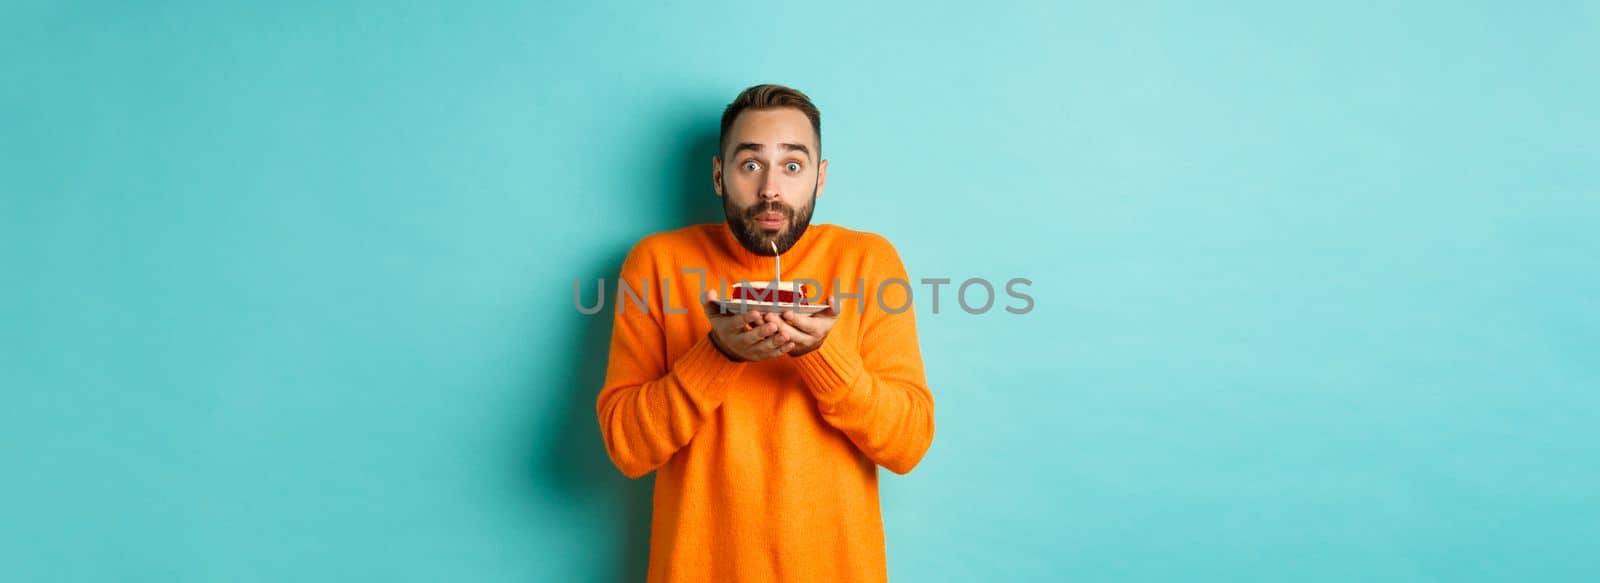 Handsome adult man celebrating birthday, blowing out candle on cake and making wish, standing against turquoise background.